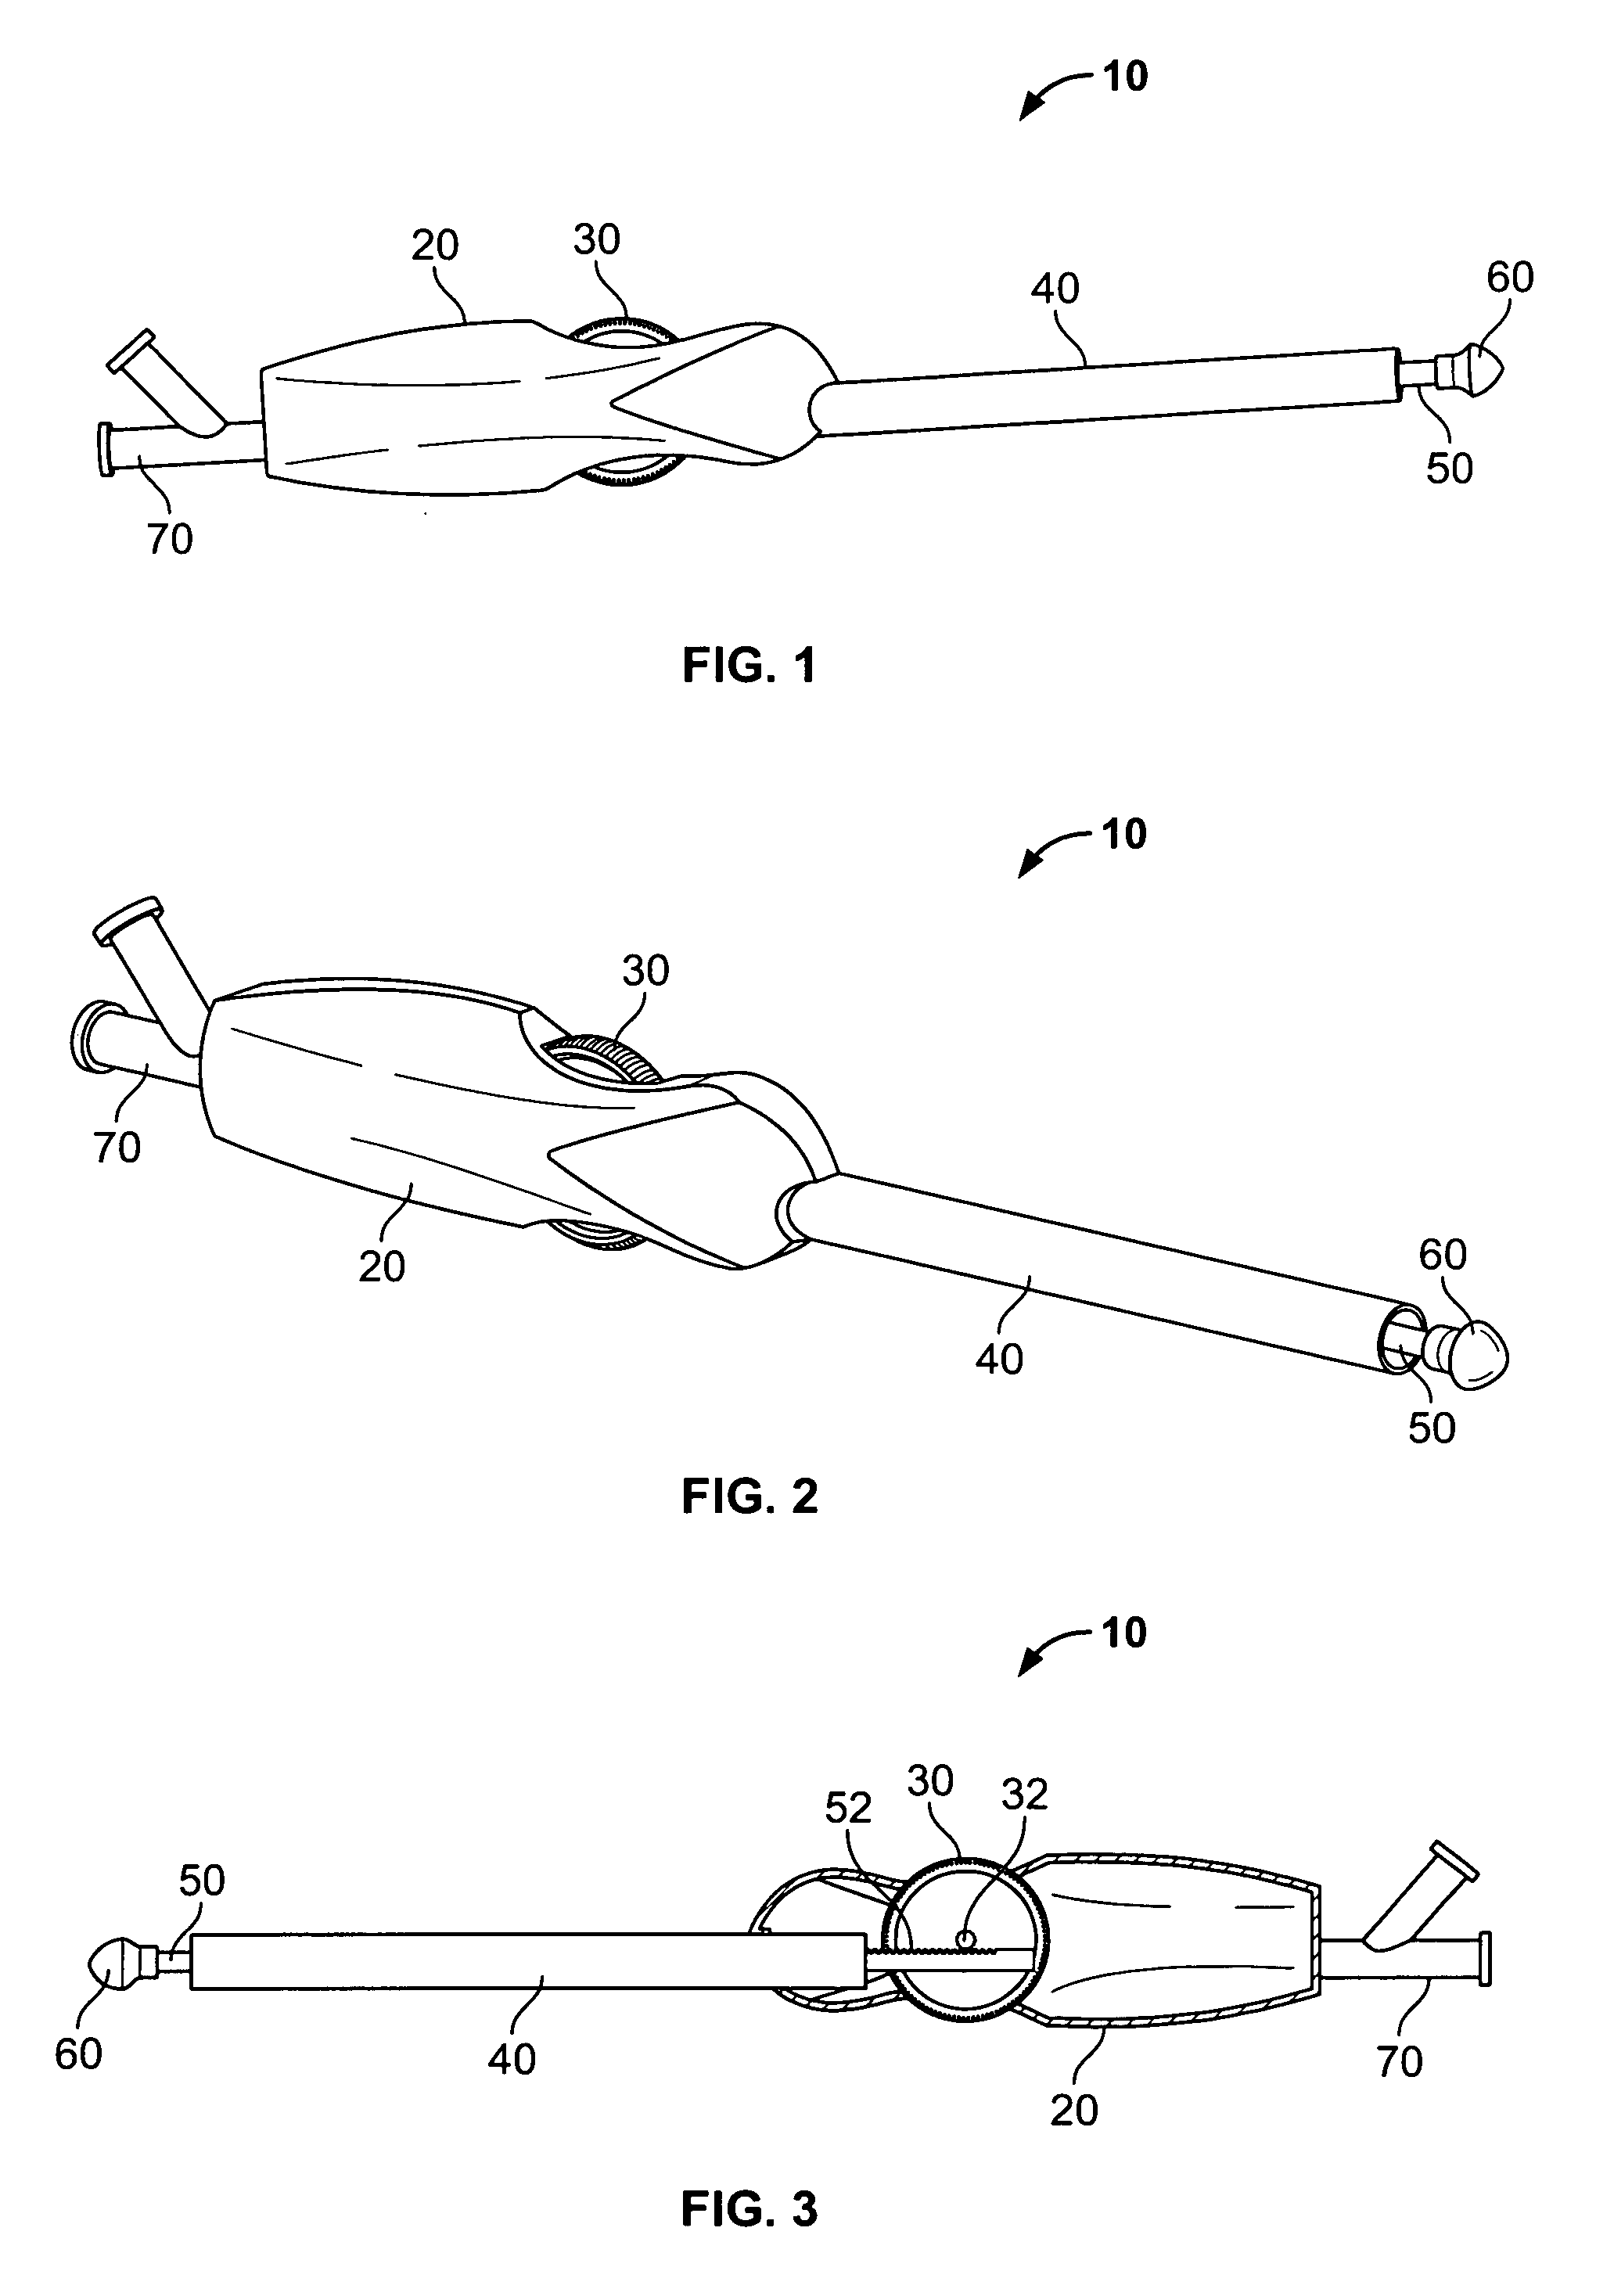 Apparatus and method for implanting collapsible/expandable prosthetic heart valves